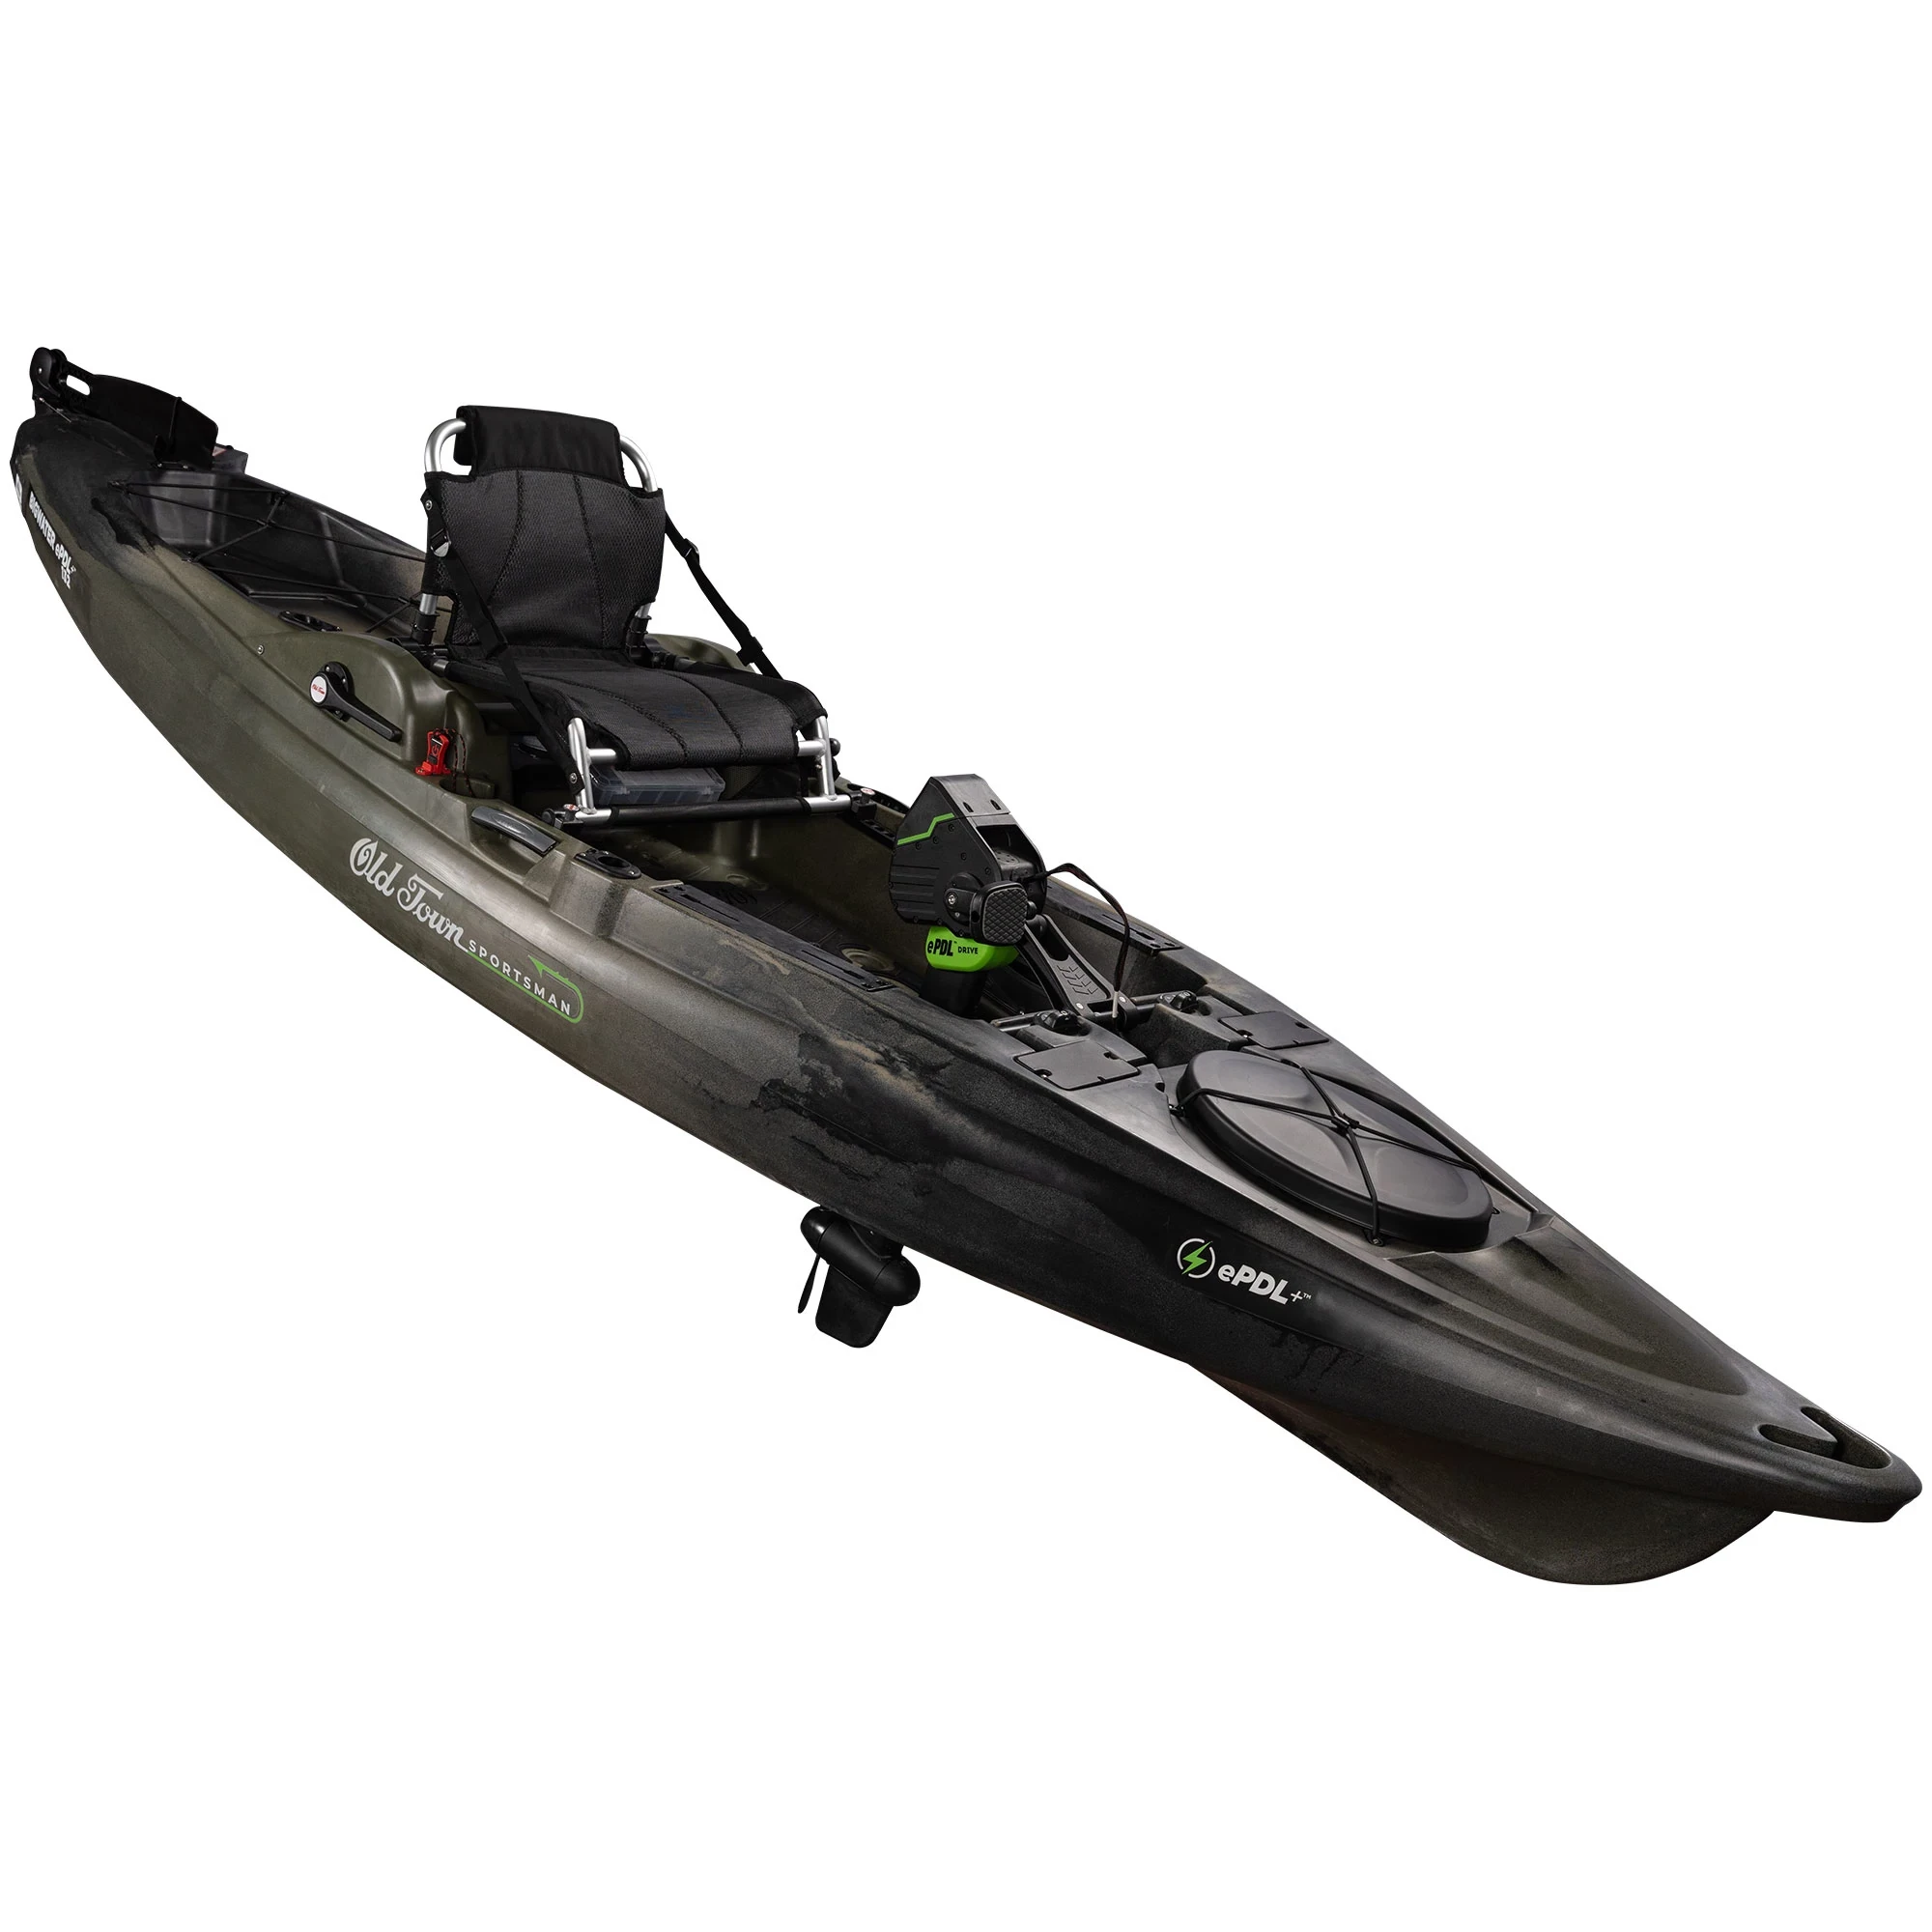 Angled View with Prop Down on Sportsman BigWater ePDL+ 132 - Marsh Camo